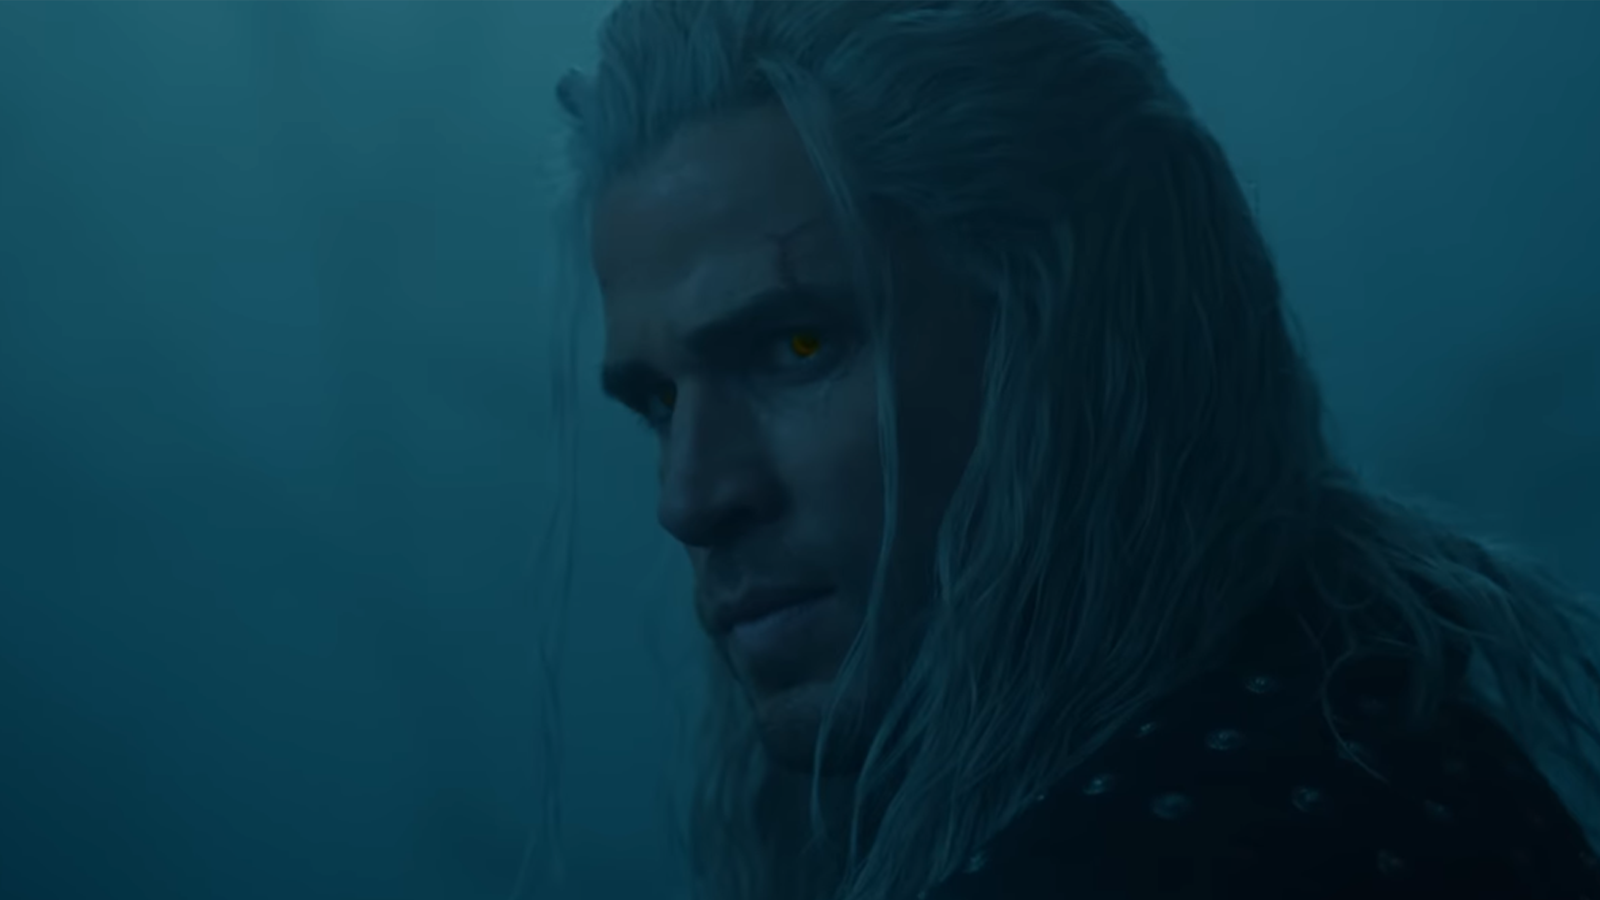 First look at Liam Hemsworth as Geralt in The Witcher